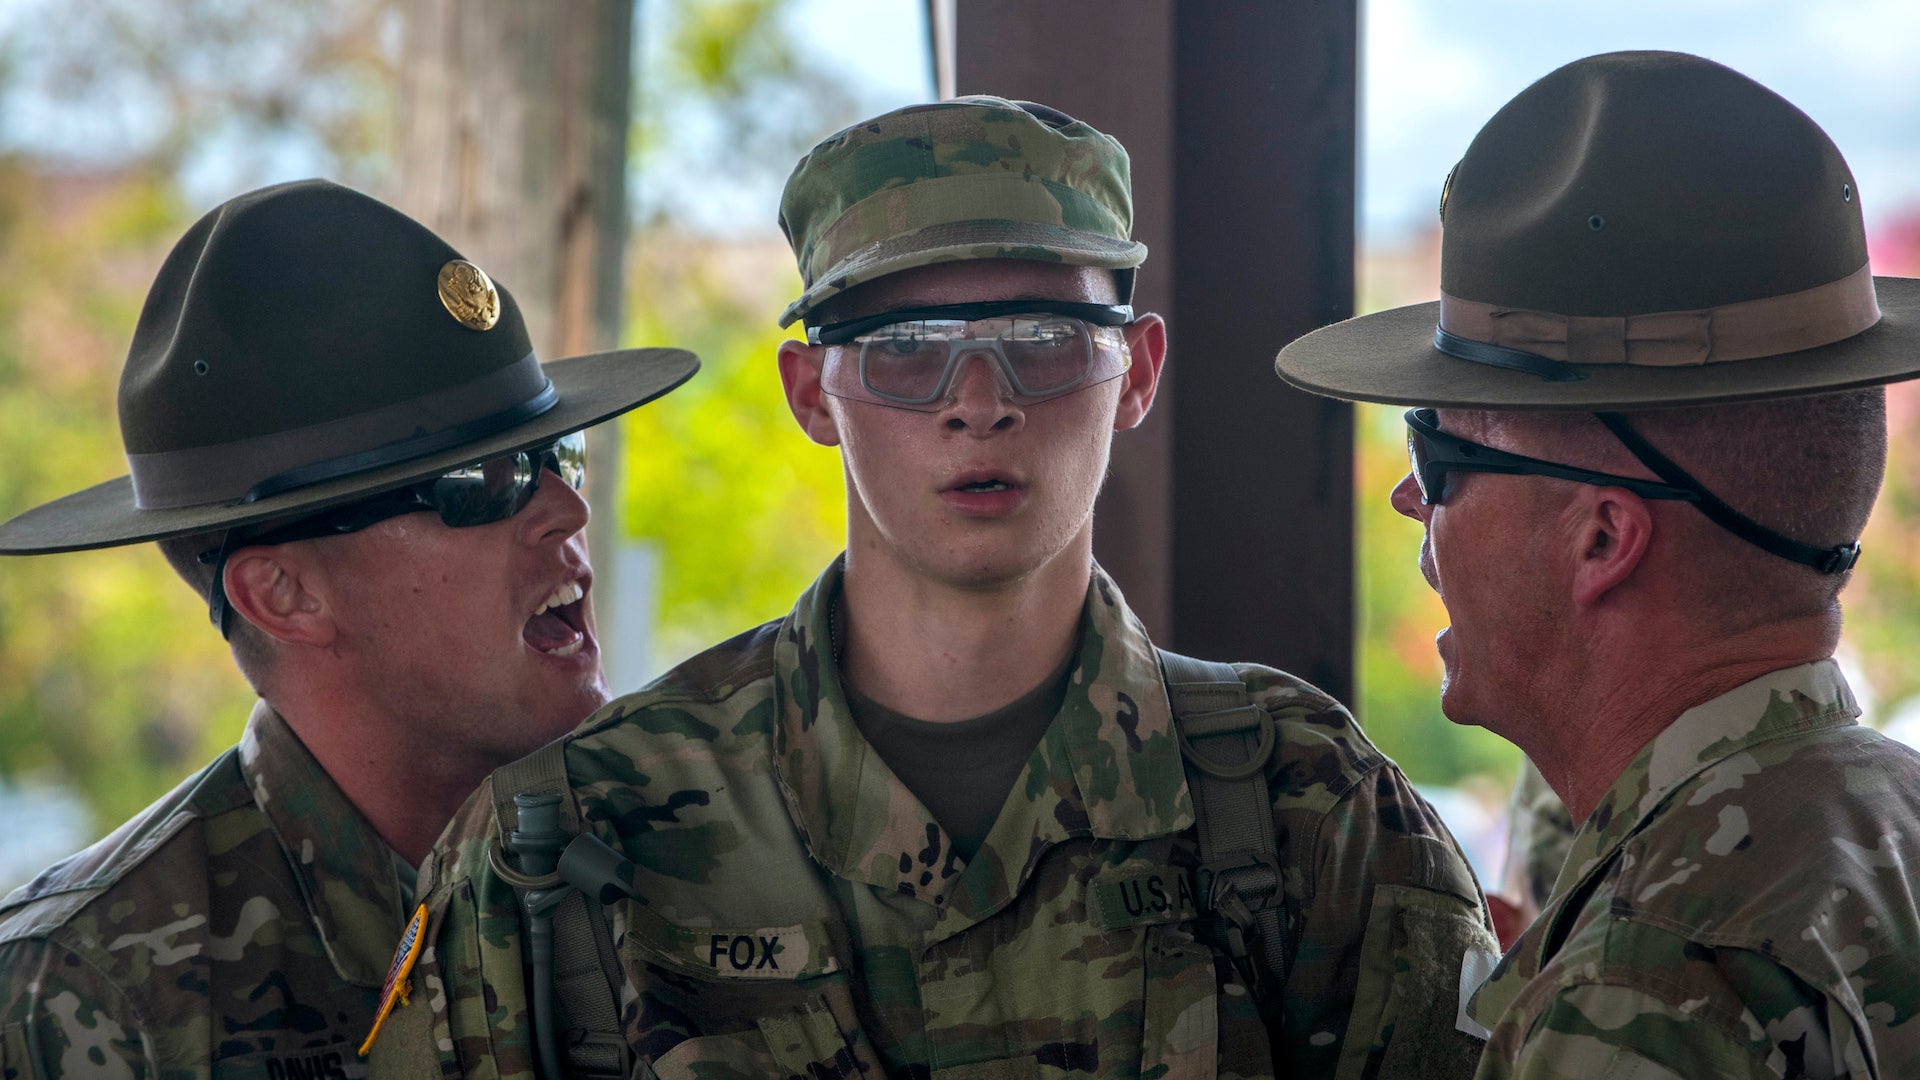 Military leaders worry America’s youth are still too fat or dumb to fight